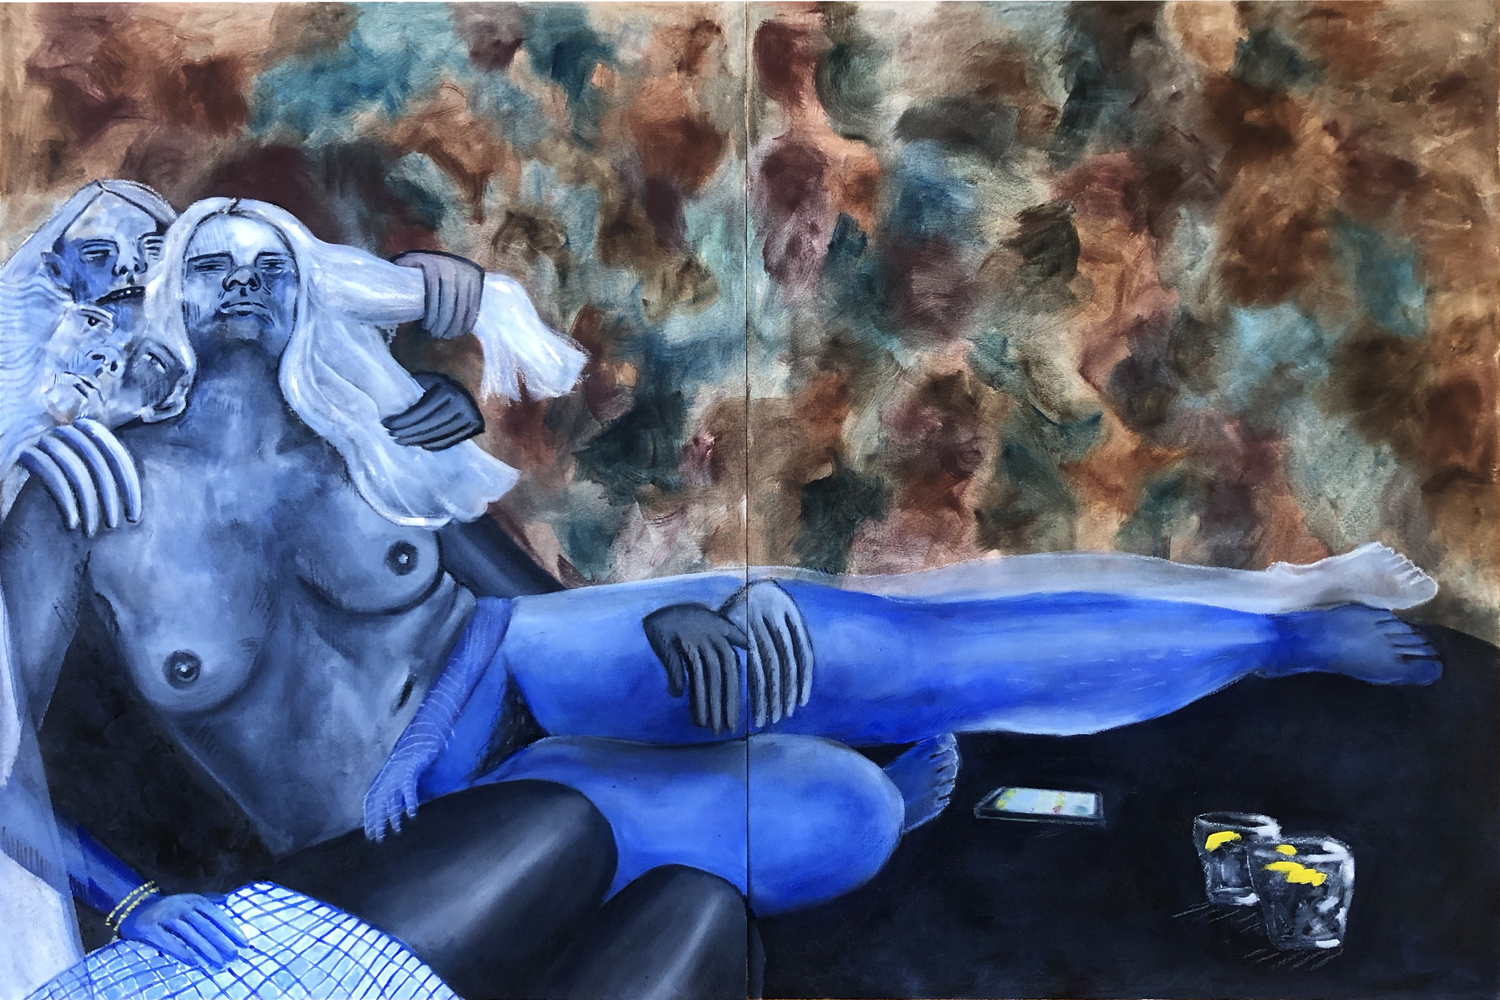  Nude blue coloured women in an interior setting, surreal elements surround. 